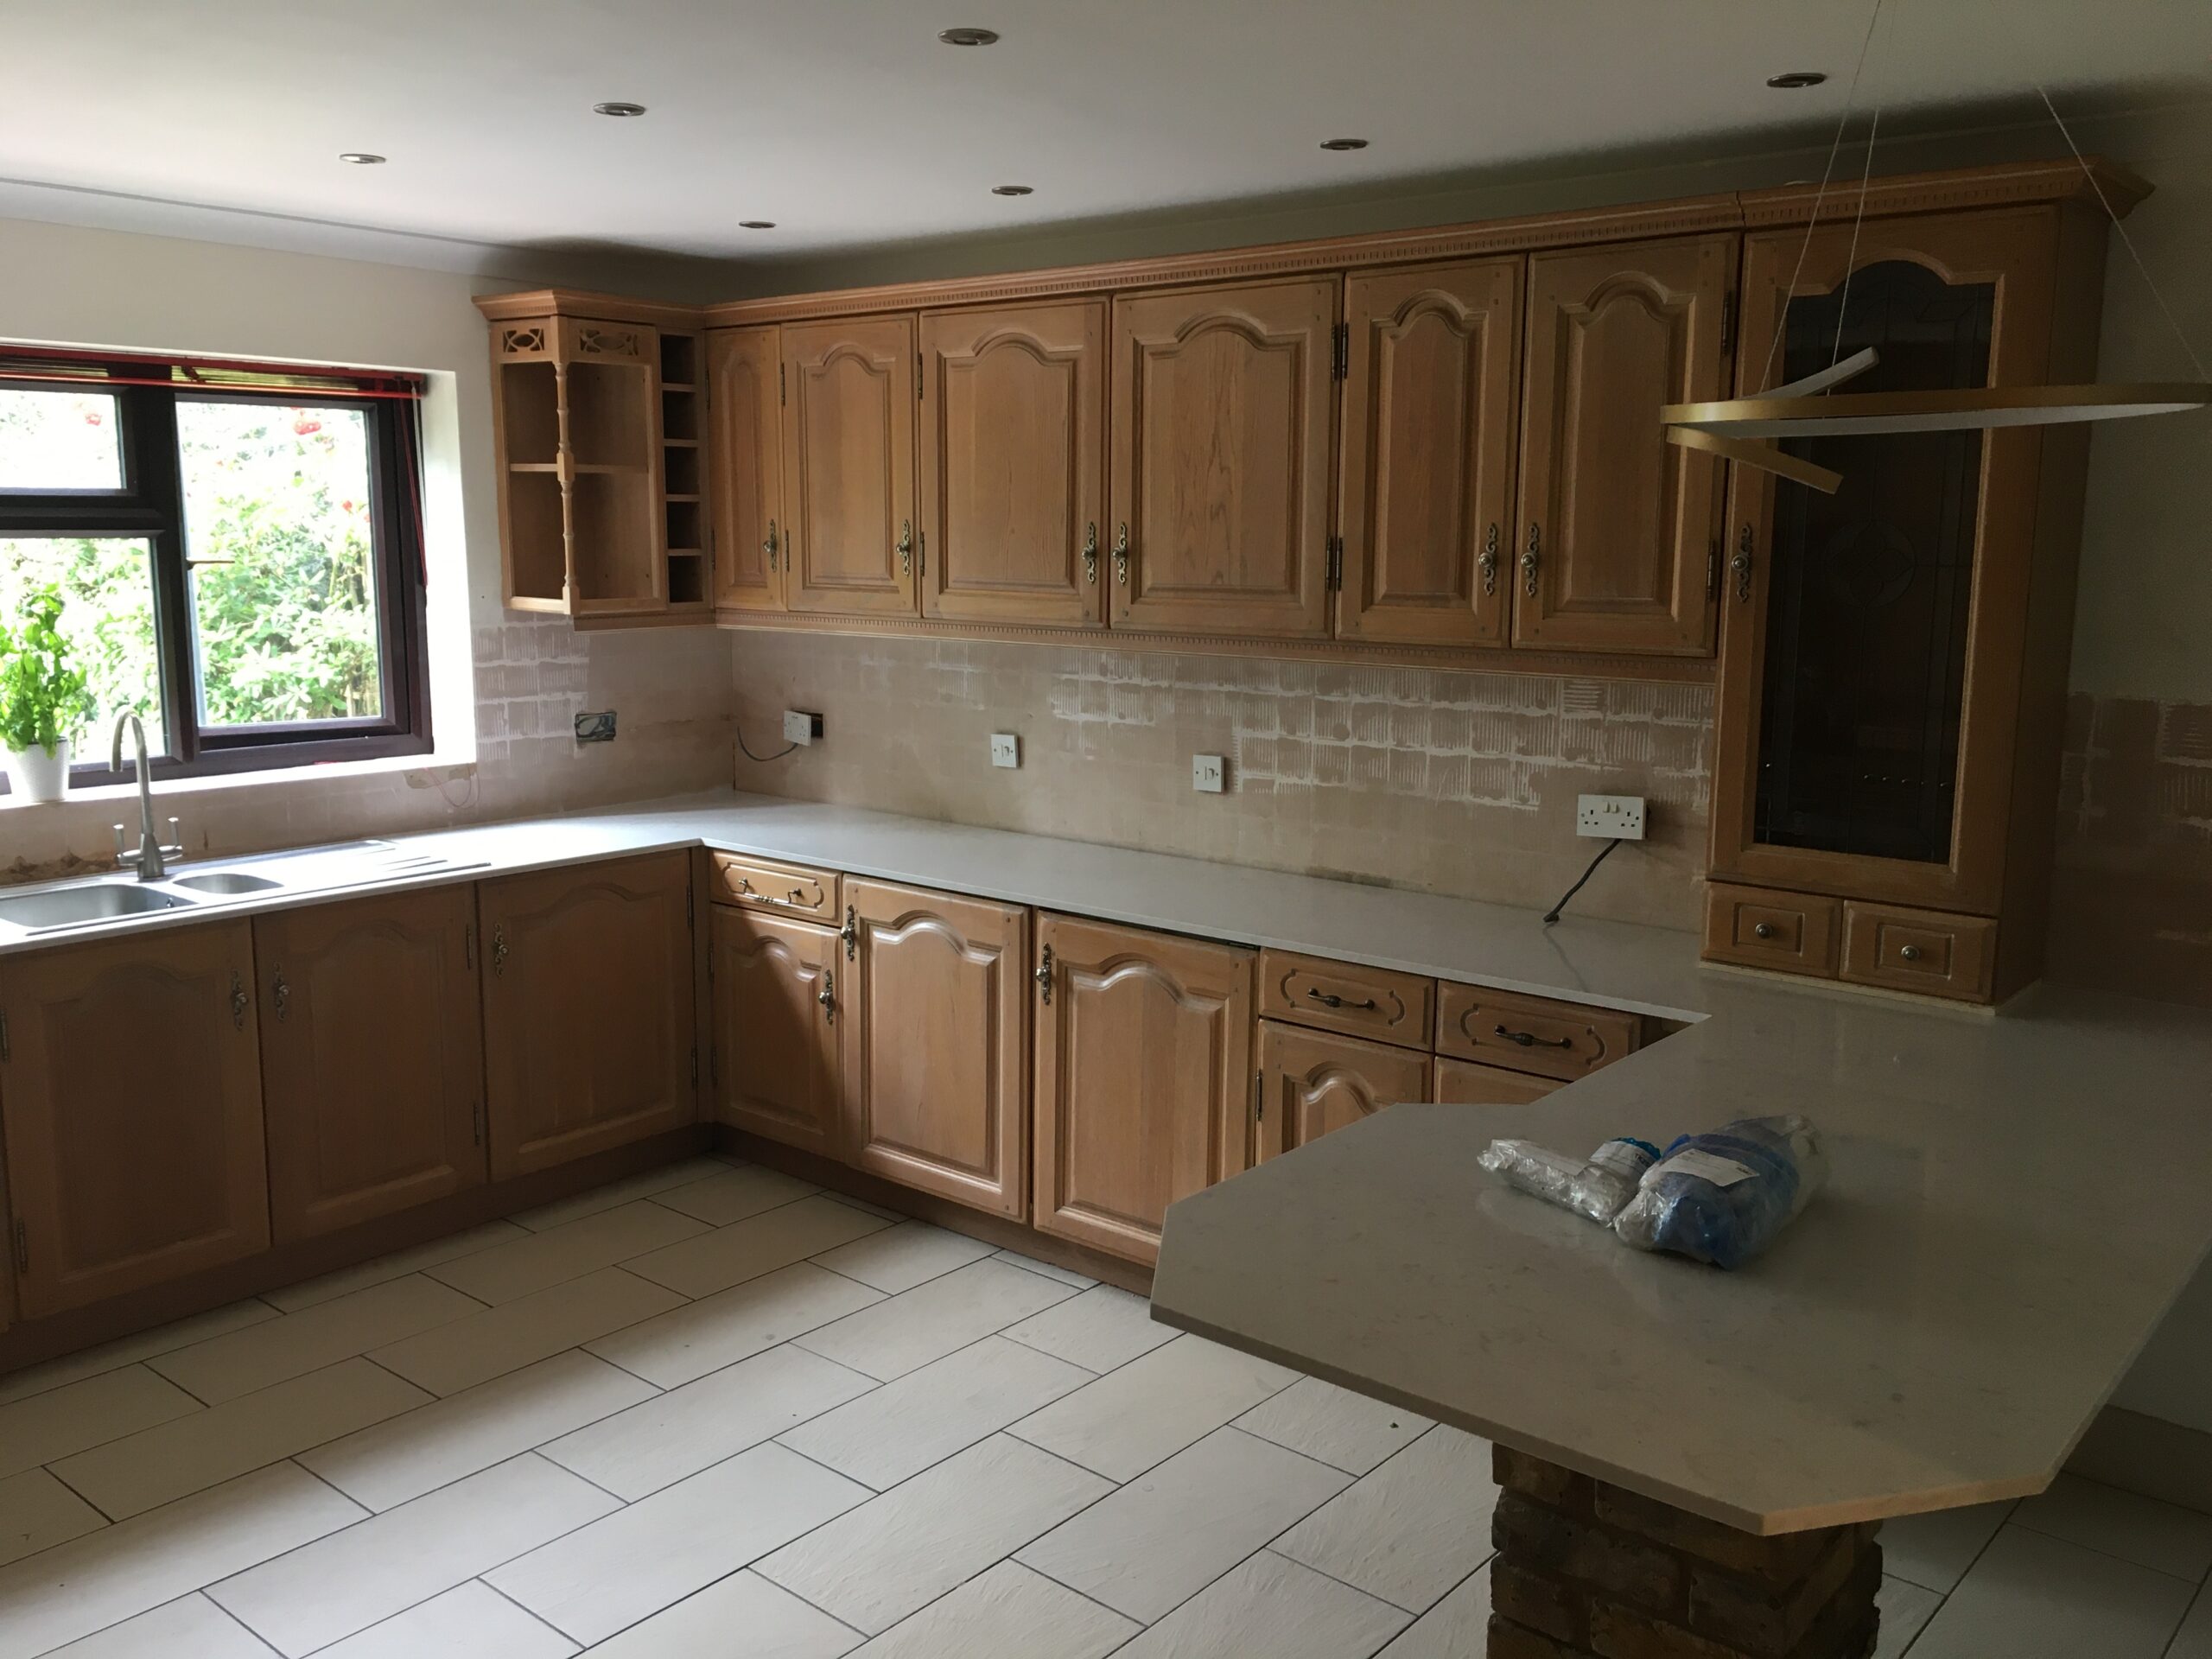 Gillingham Kitchen - RAL Colour Match - Before 2